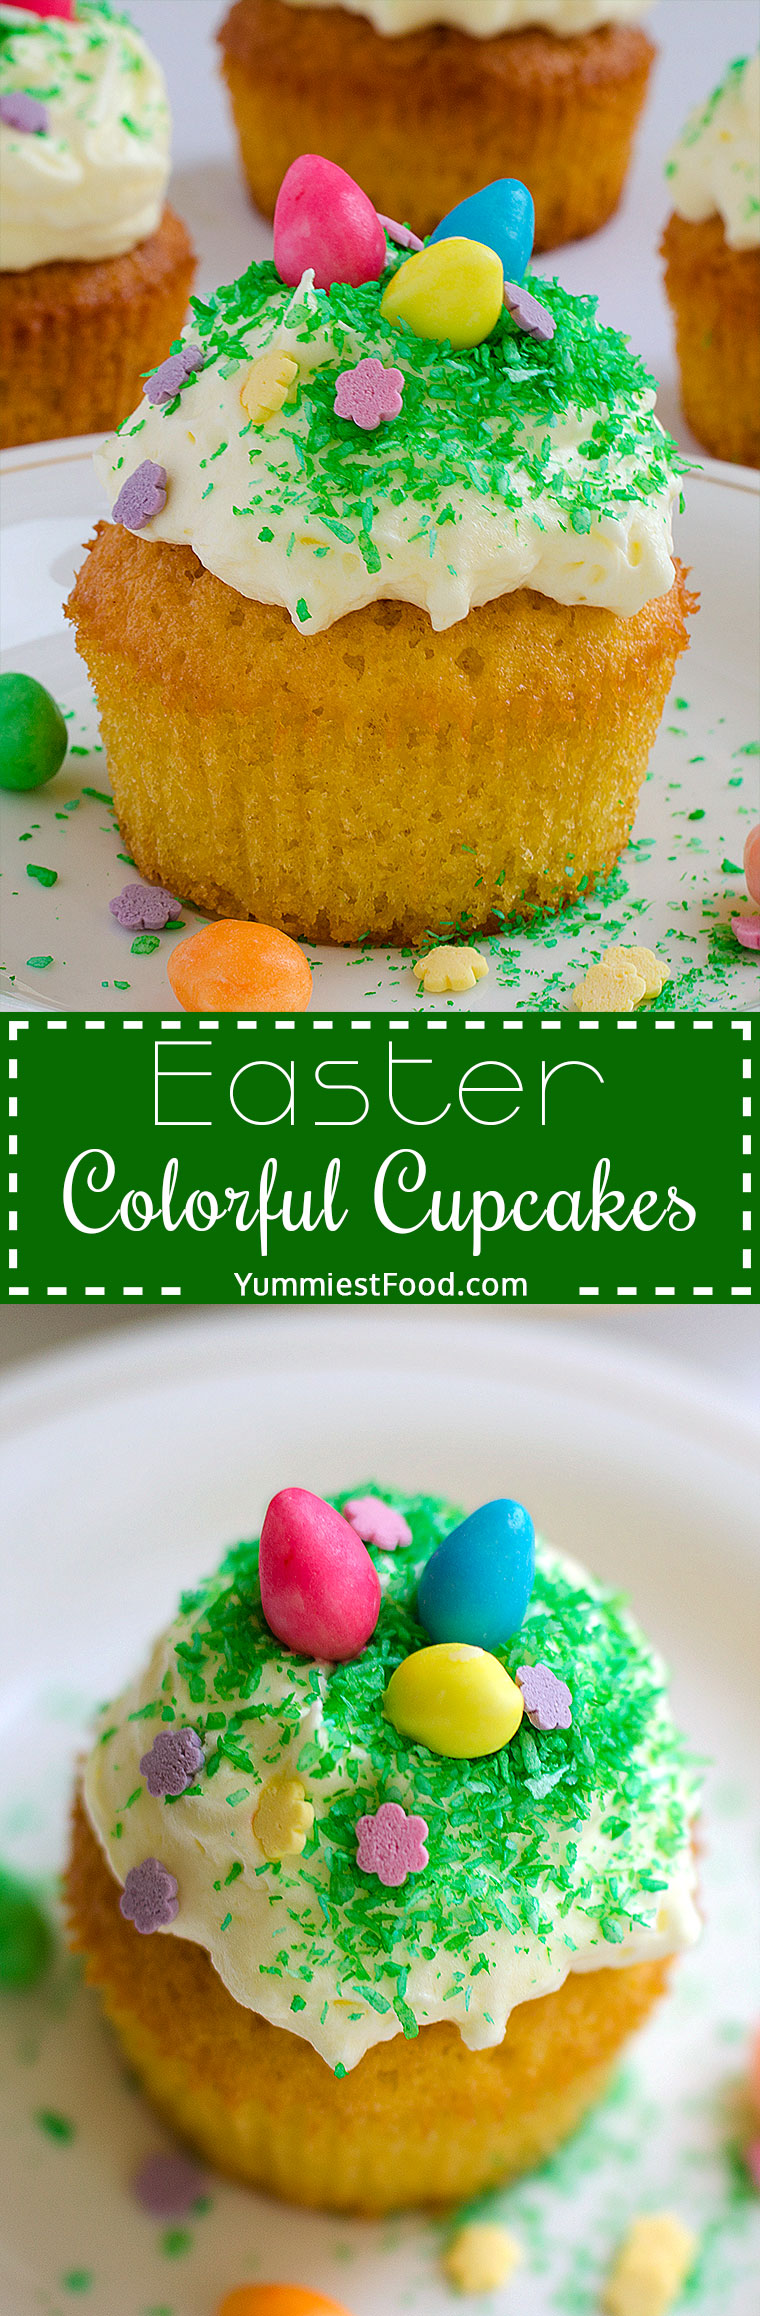 Easter Colorful Cupcakes - Easter is coming, so try to make these Easter colorful cupcakes and surprise your family and children! Very easy, quick, soft and delicious Easter colorful cupcakes